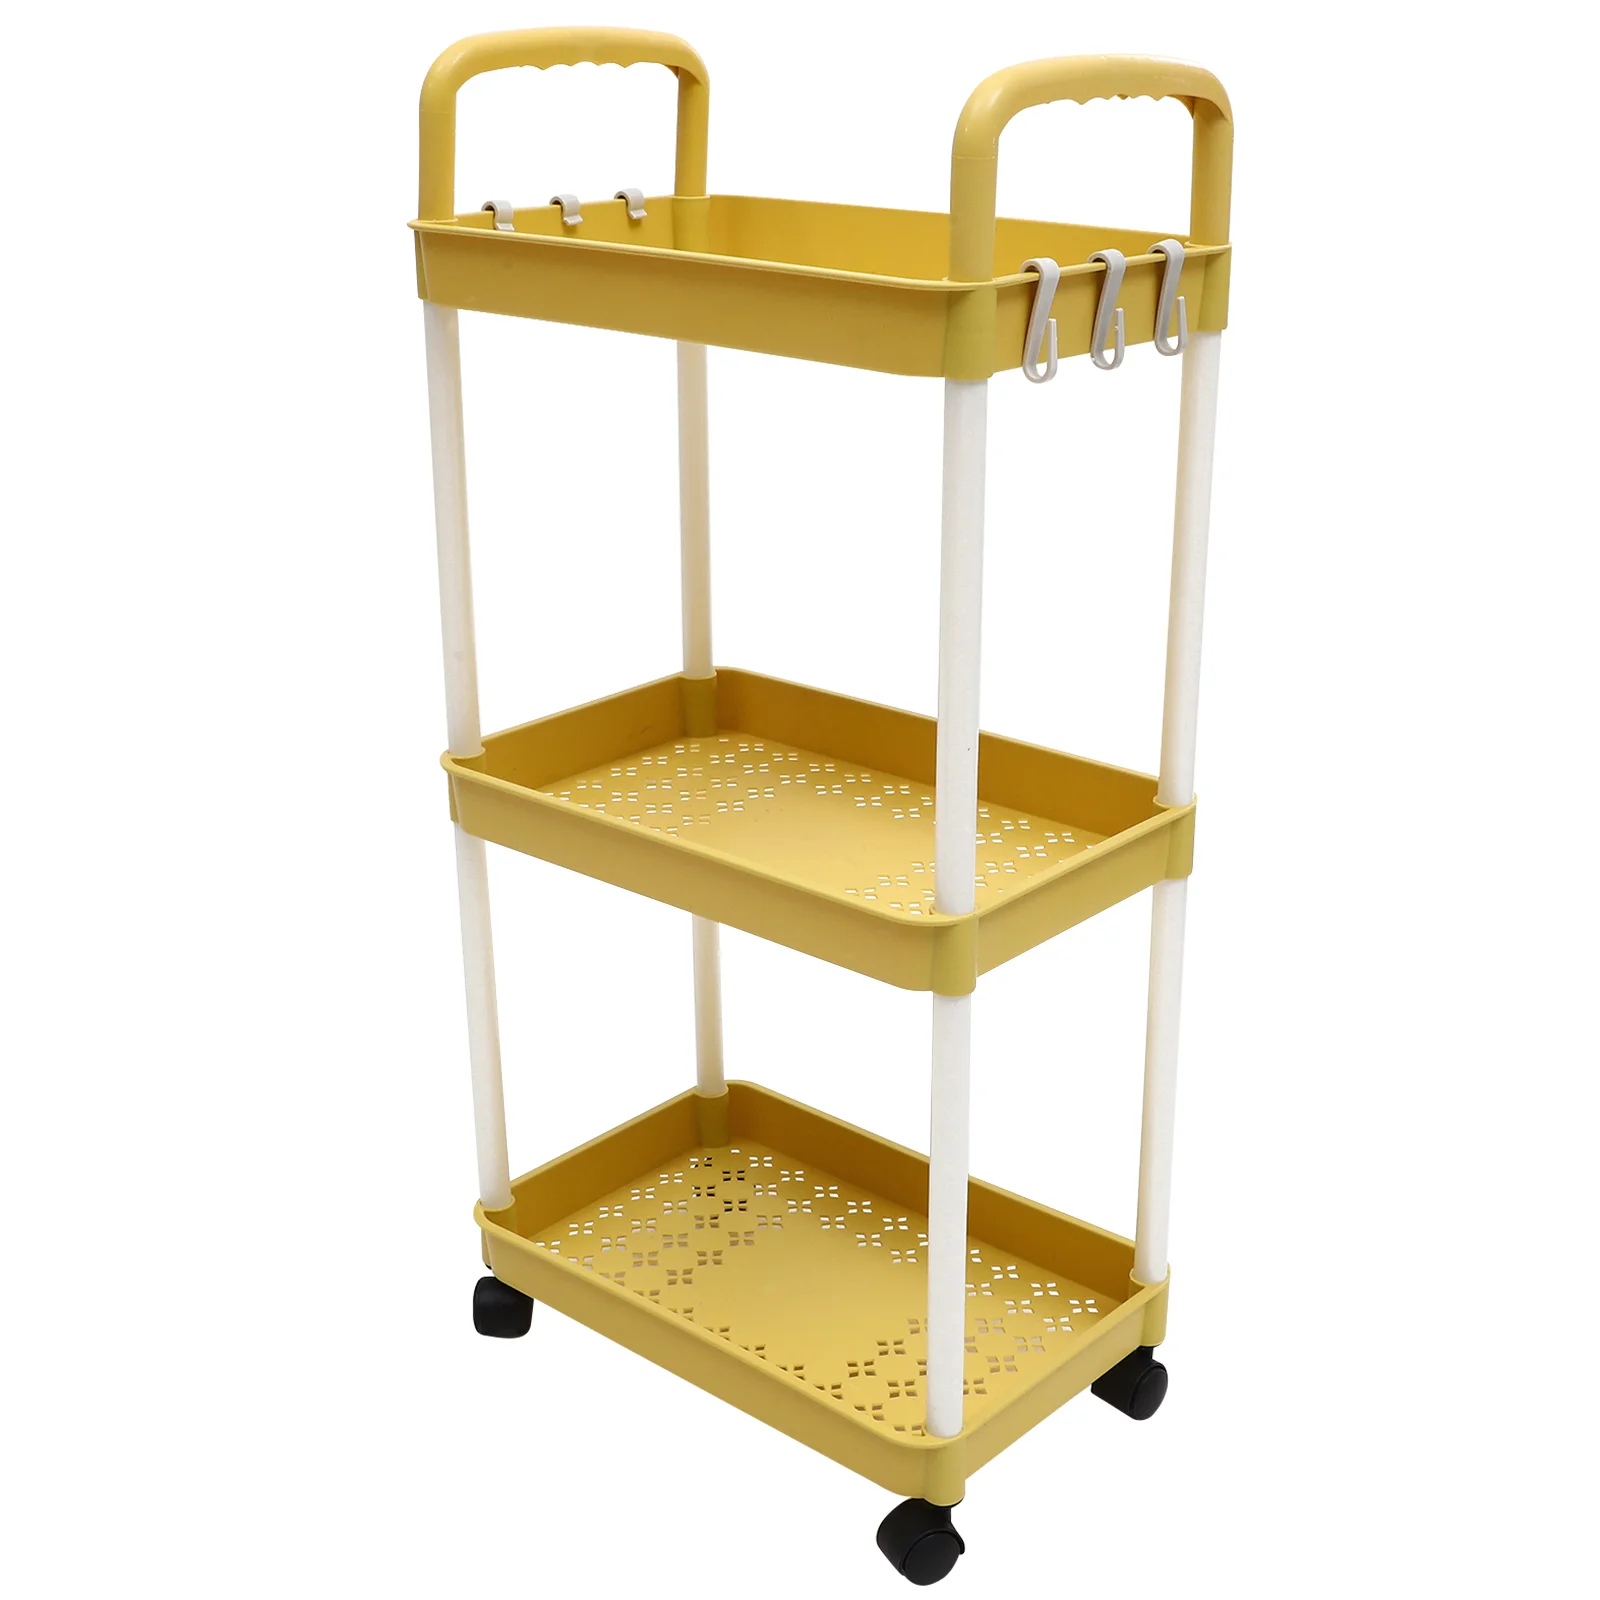 

Rolling Pantry Storage Cart 3-Tier Trolley Rolling Cart Organizer for Kitchen Auxiliary with wheels